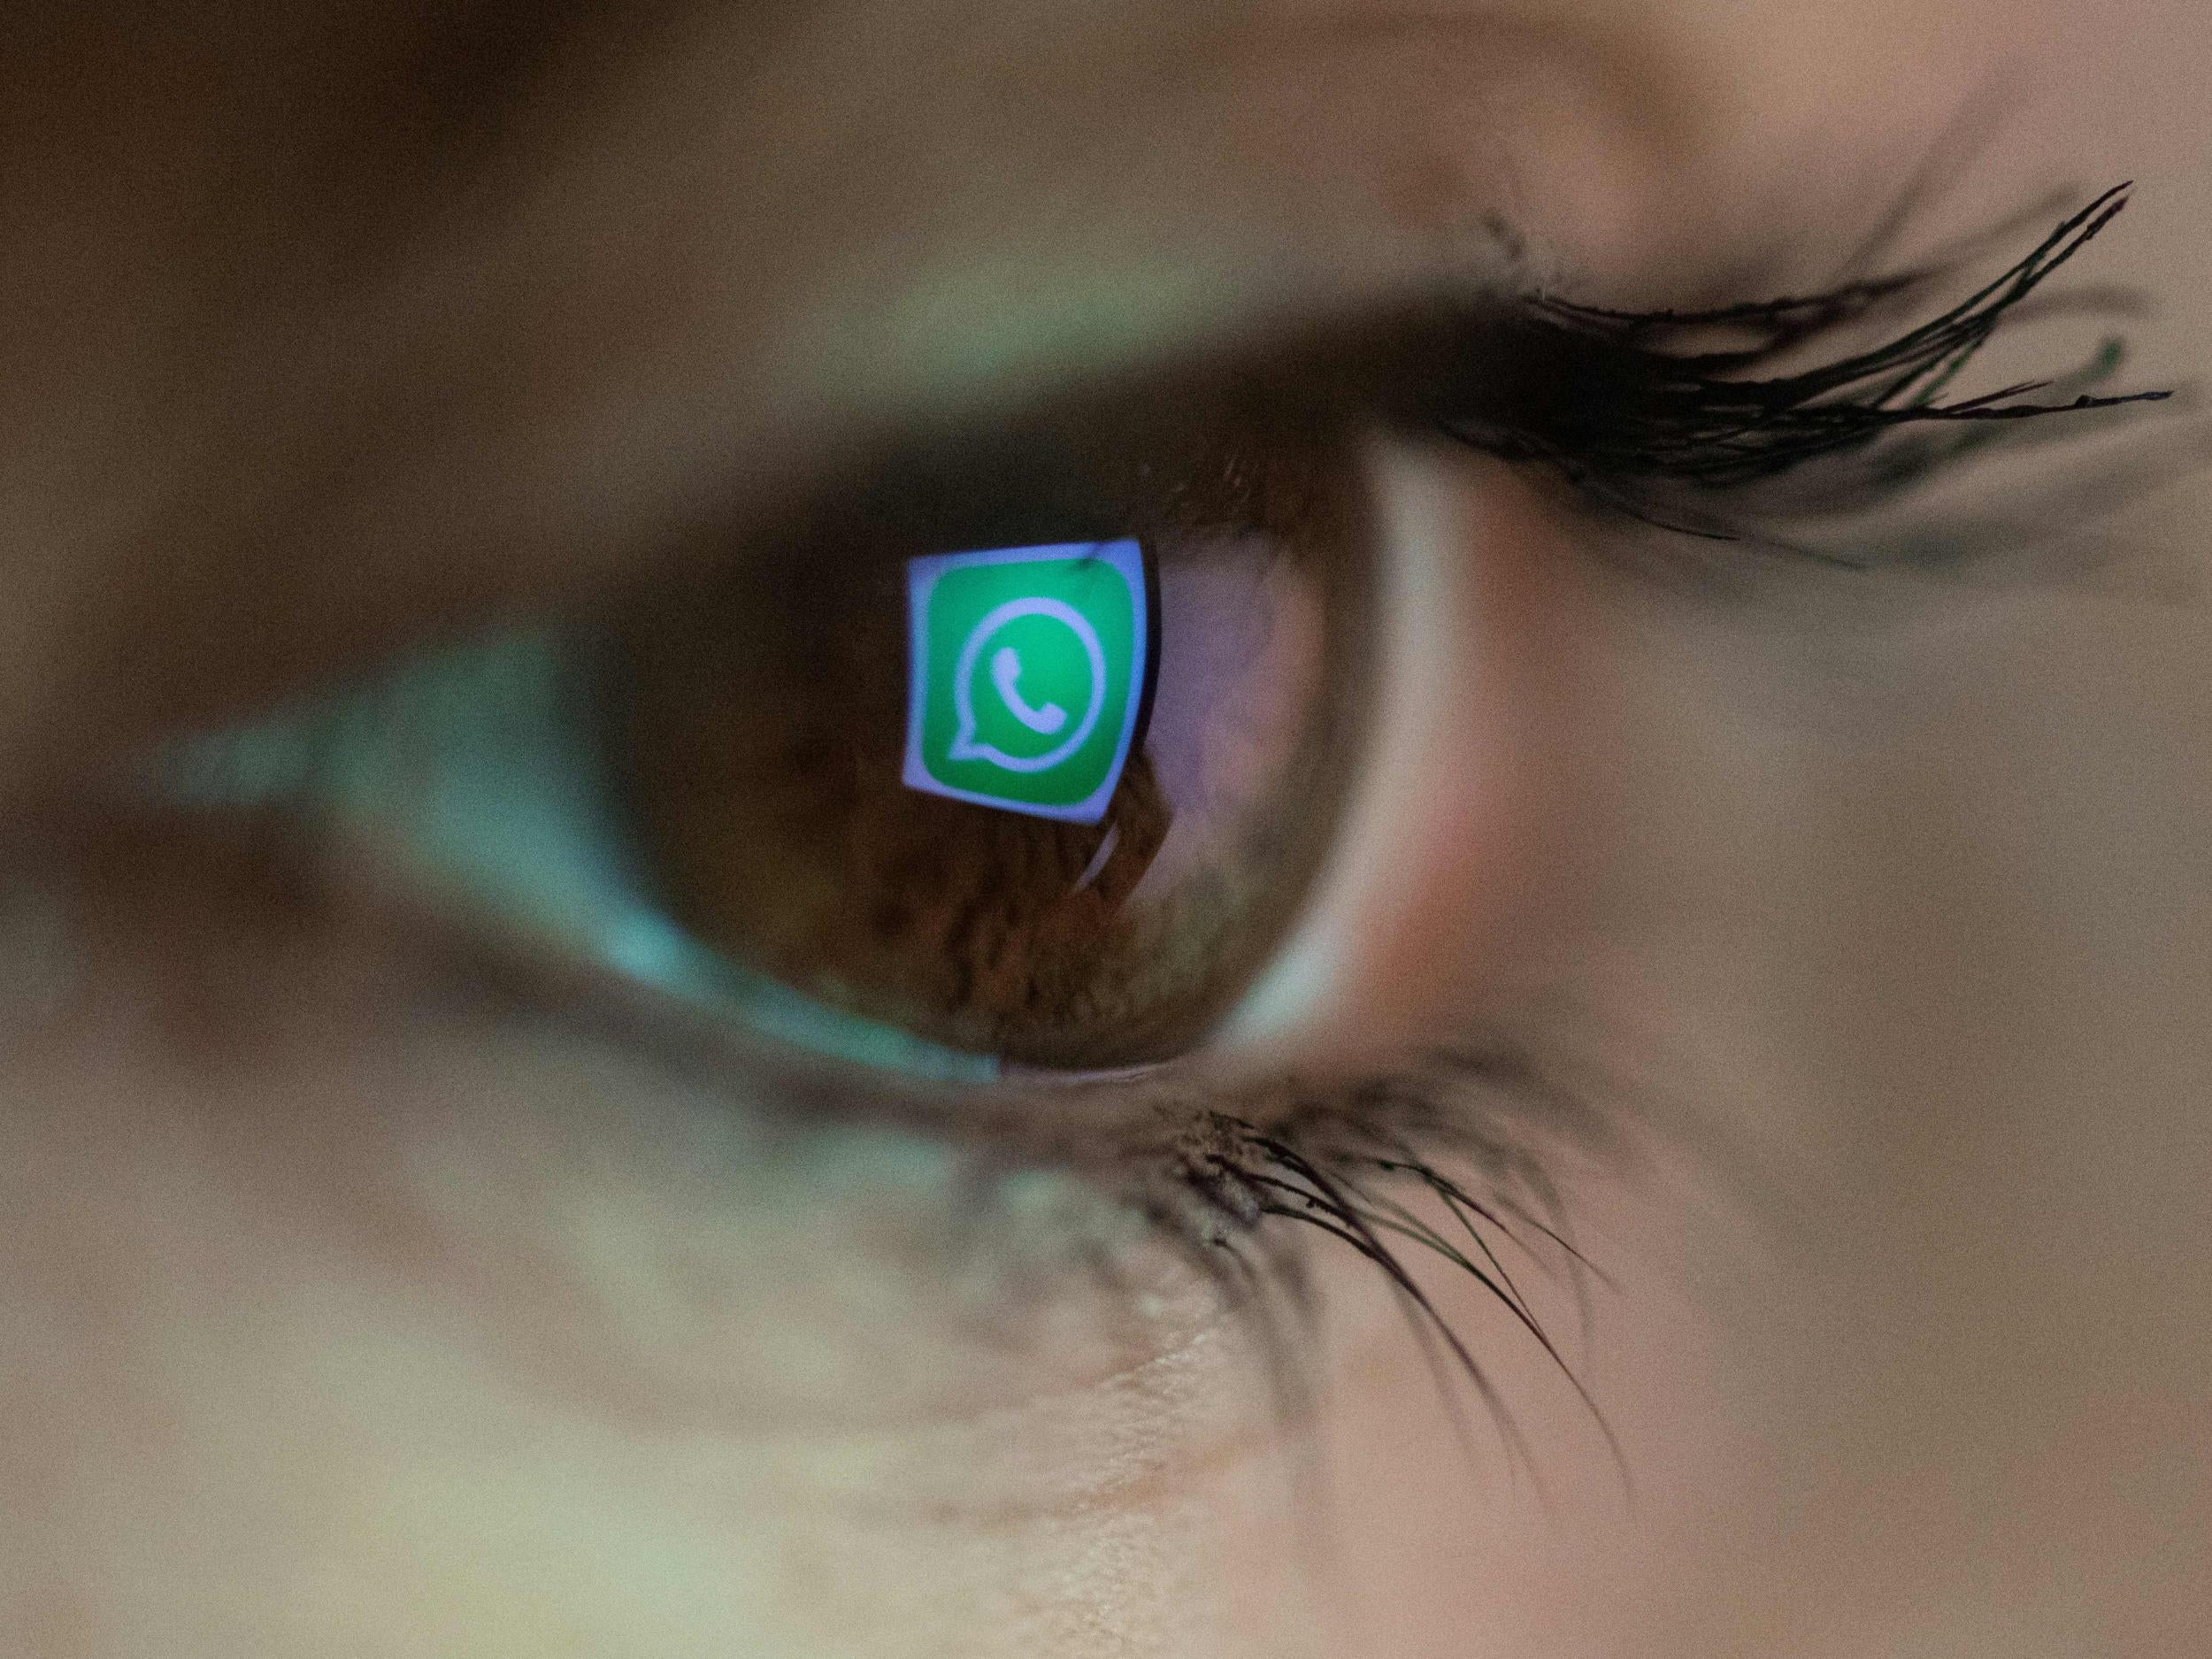 WhatsApp is hotbed for child sex abuse videos in India, study ...